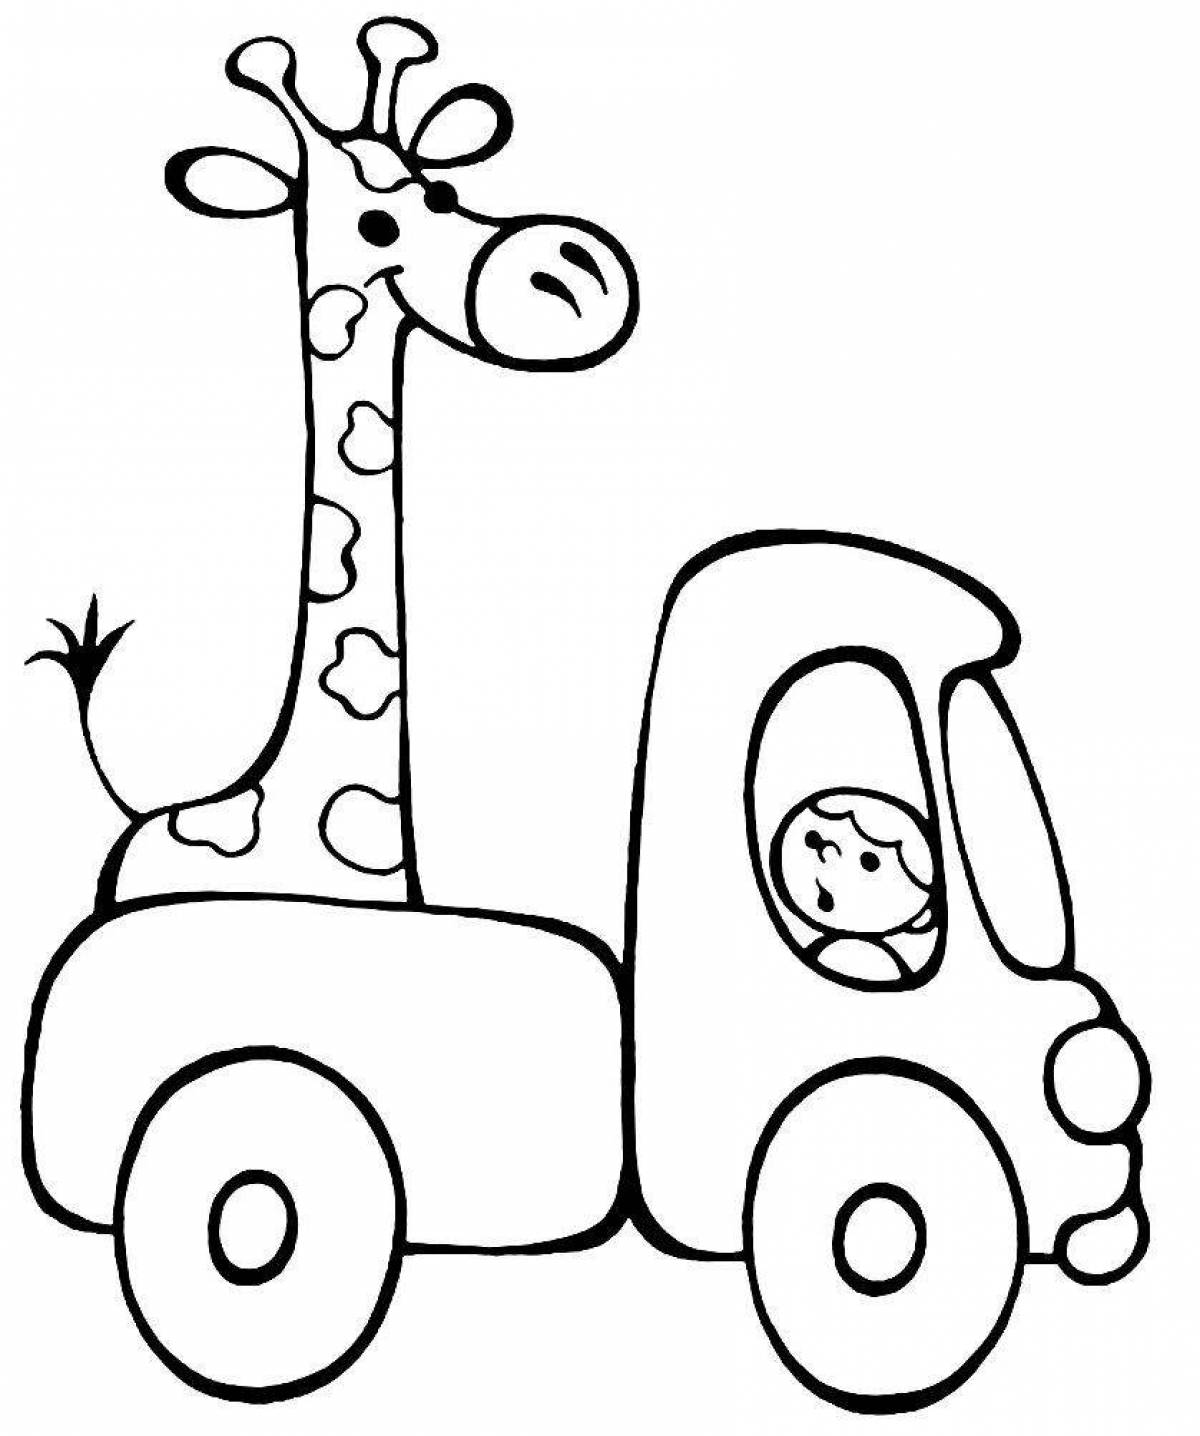 Amazing coloring pages 2 for boys